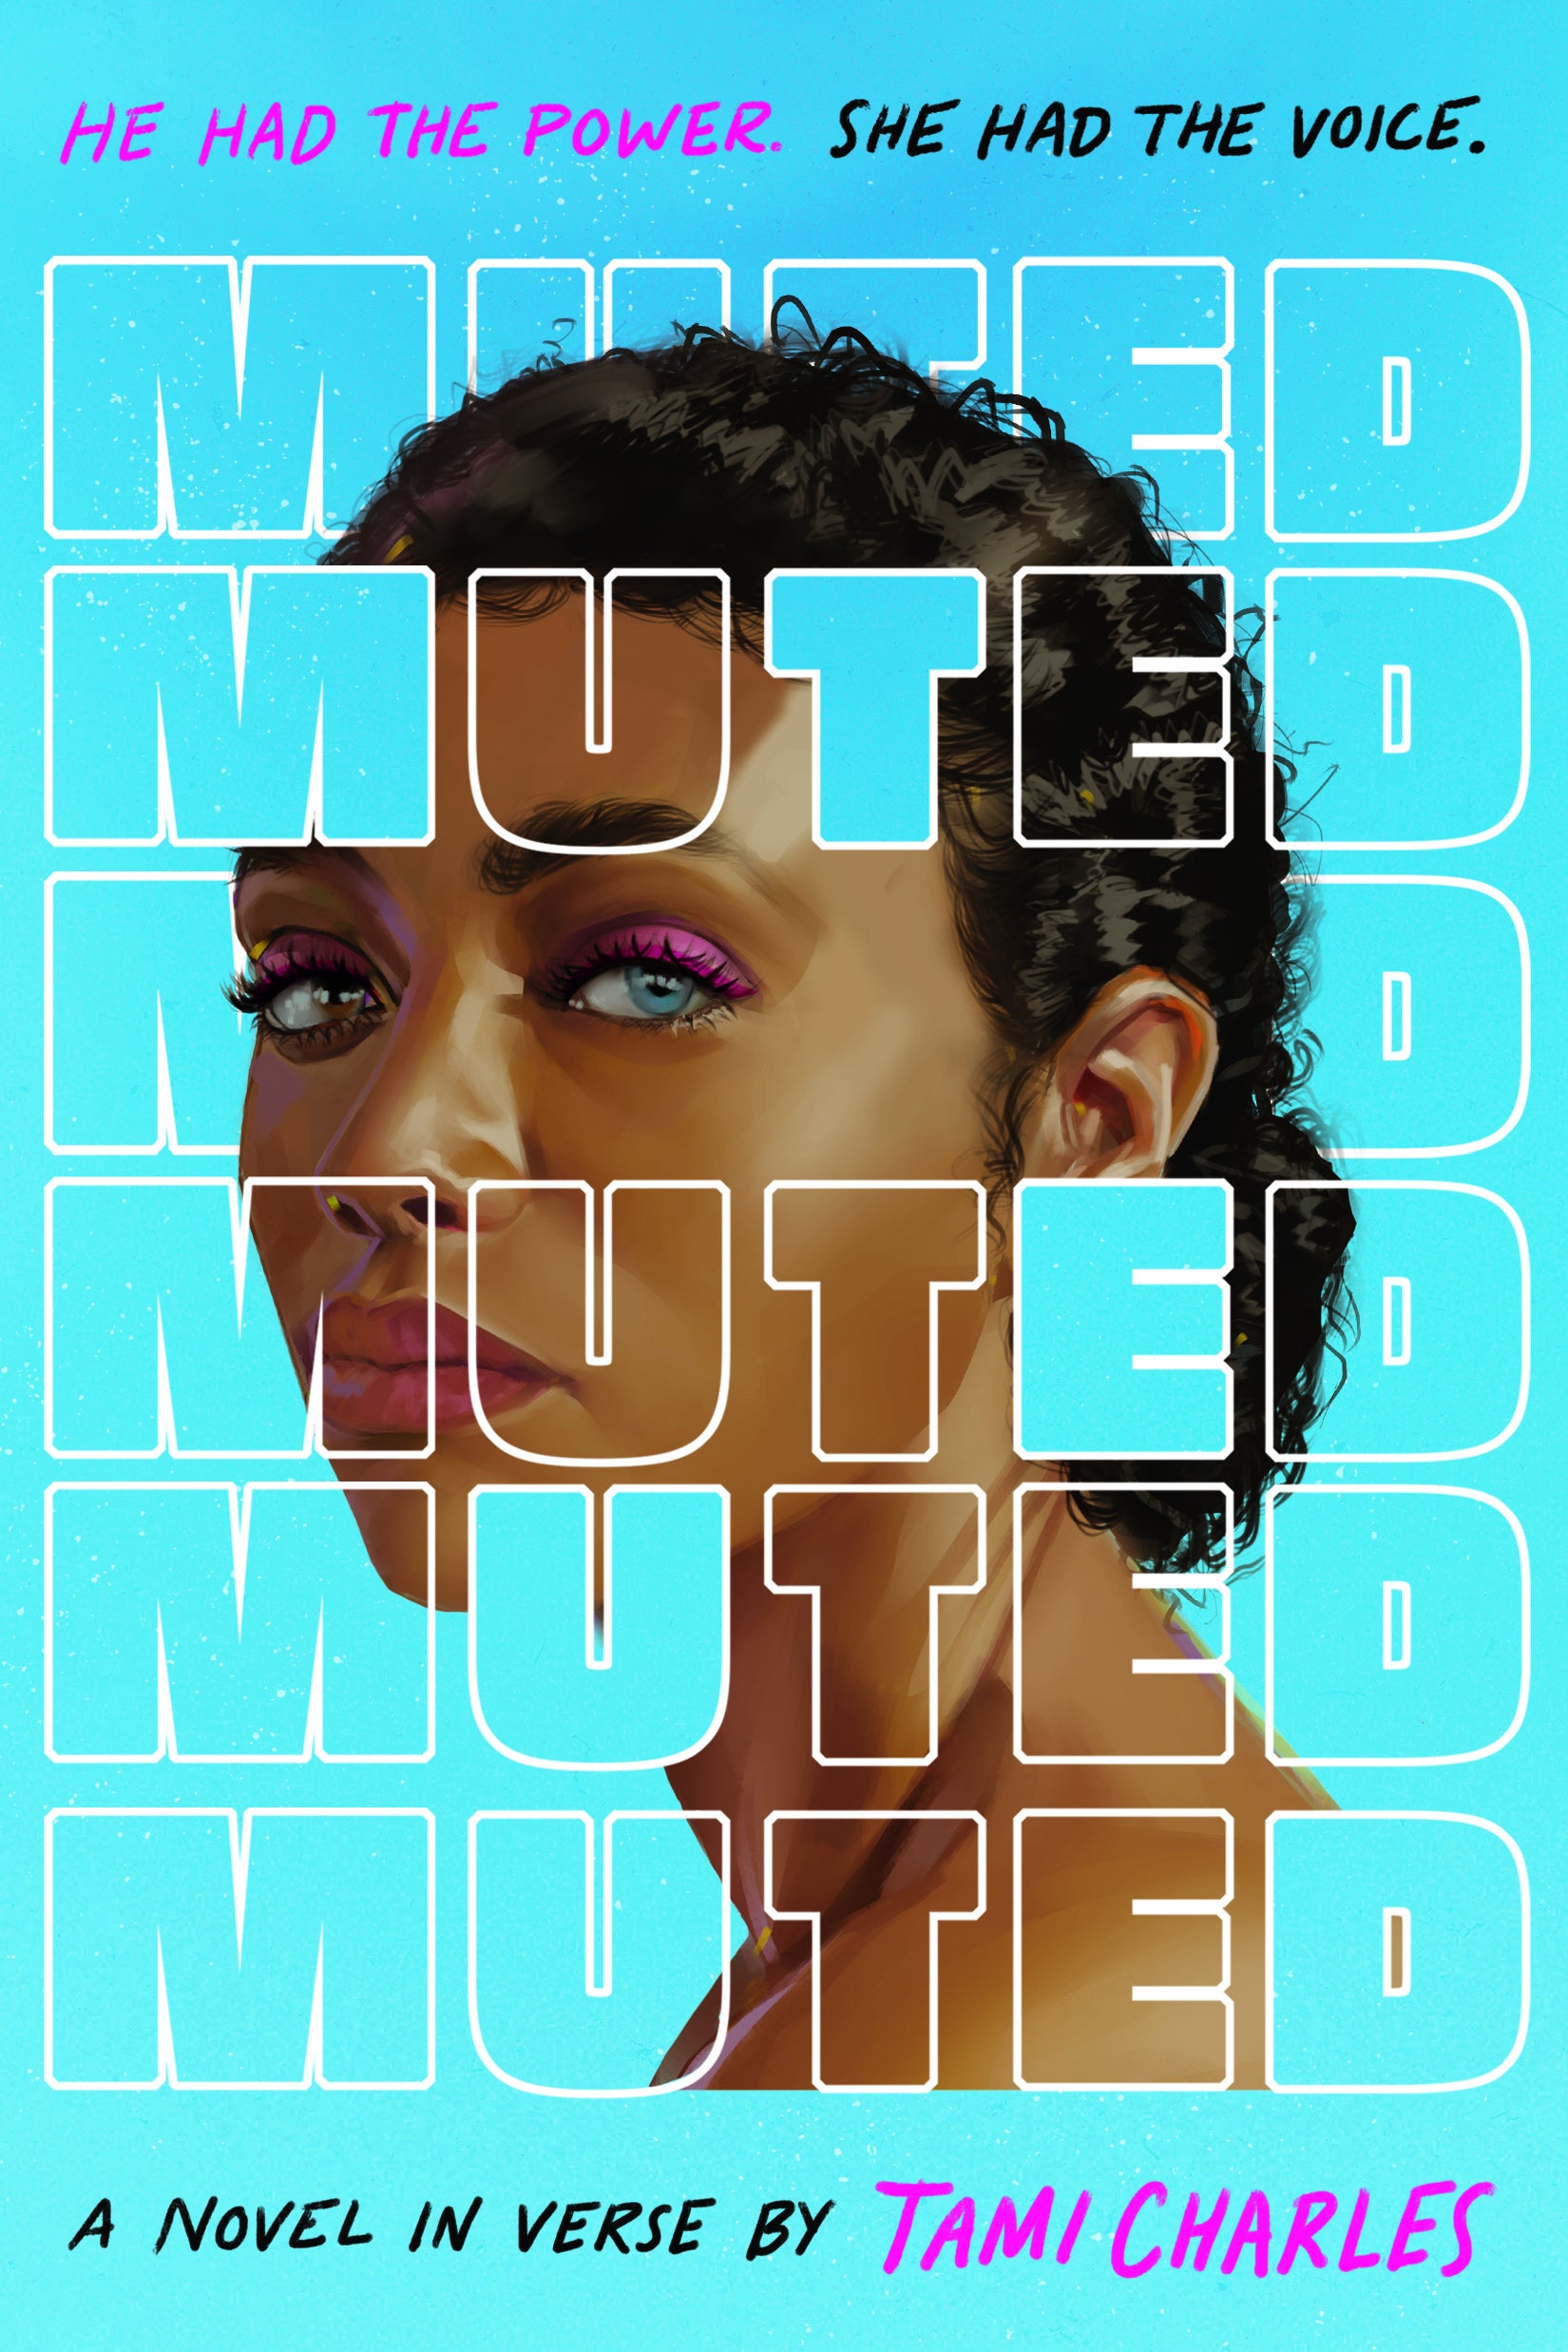 Tami Charles, Author Of 'Muted,' On How Black Women Can Find Their Voice Through Poetry